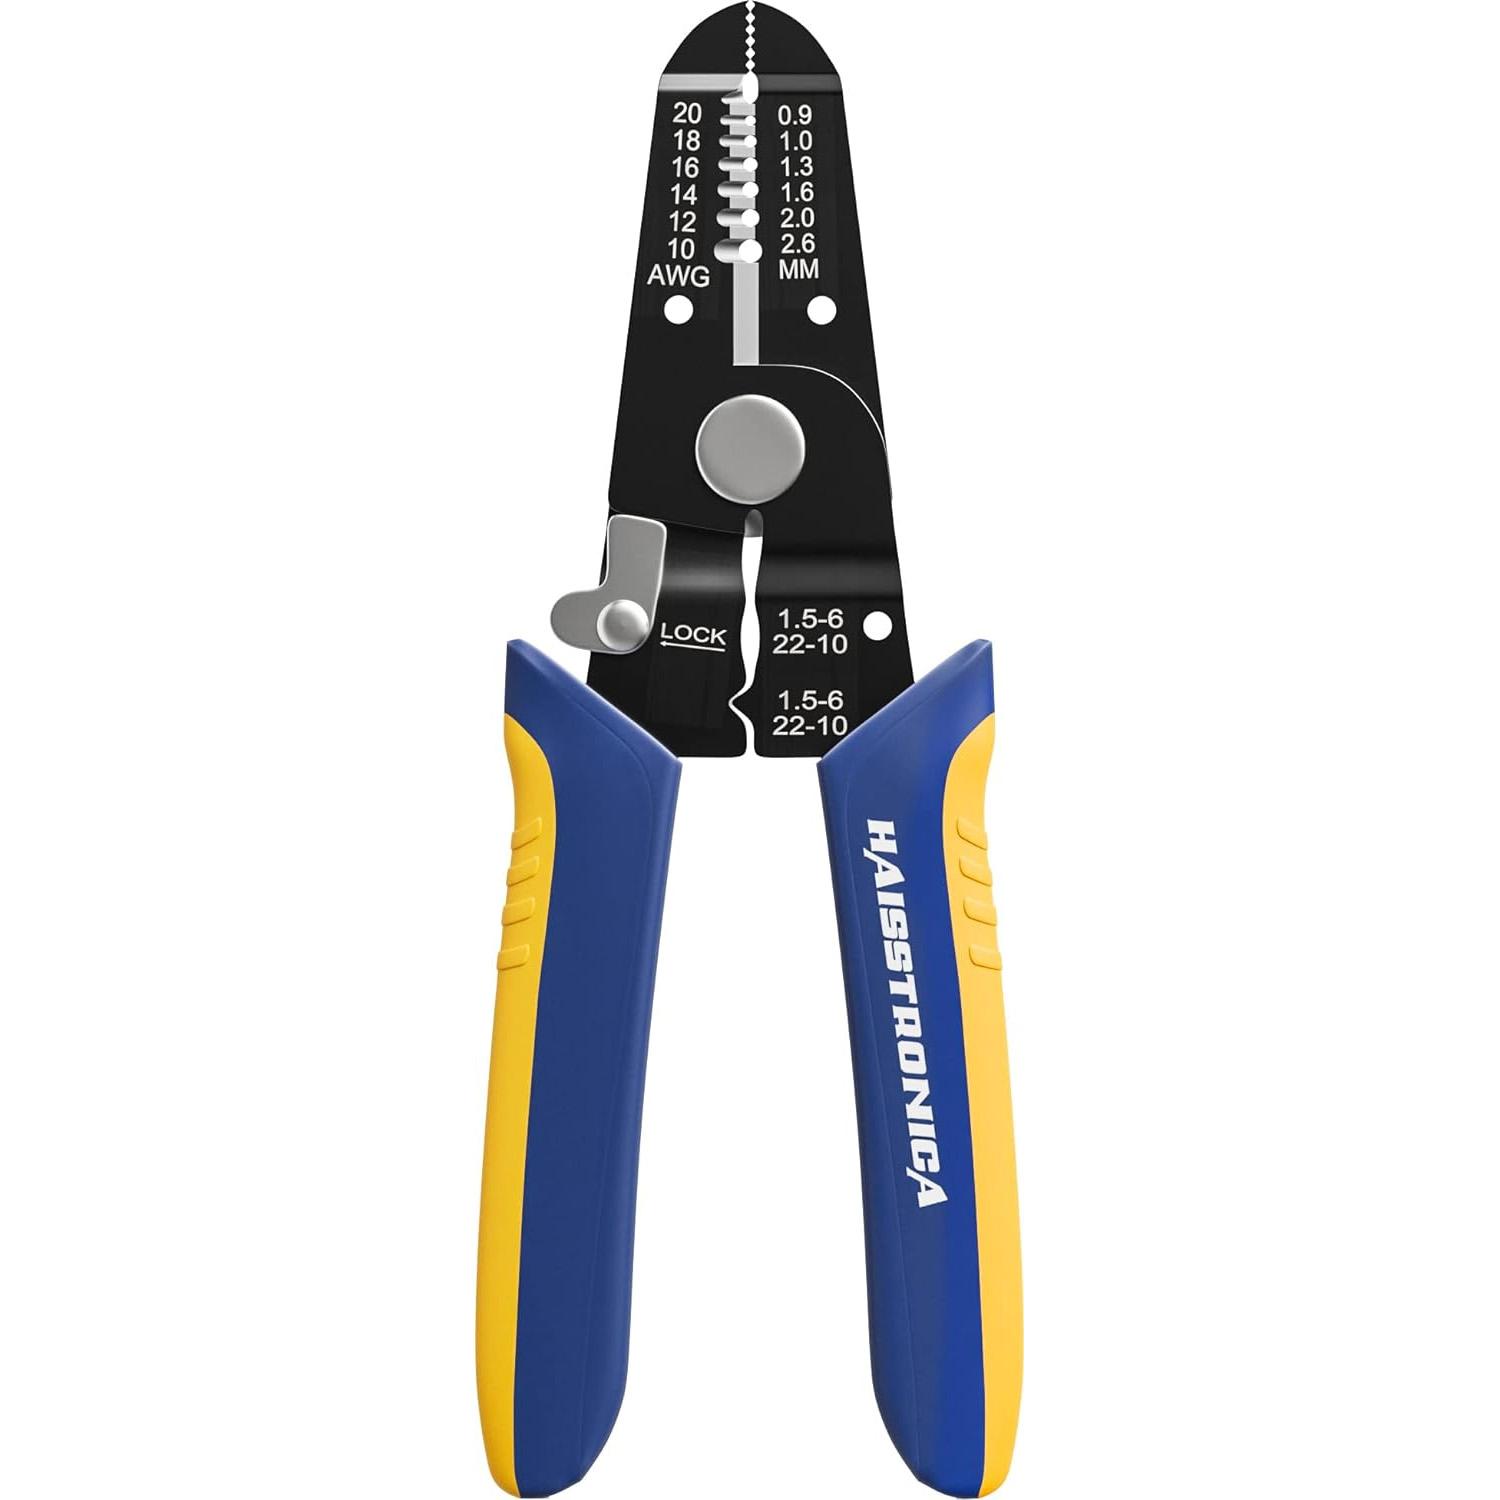 Wire Stripper Crimper Hand Tool for $4.99